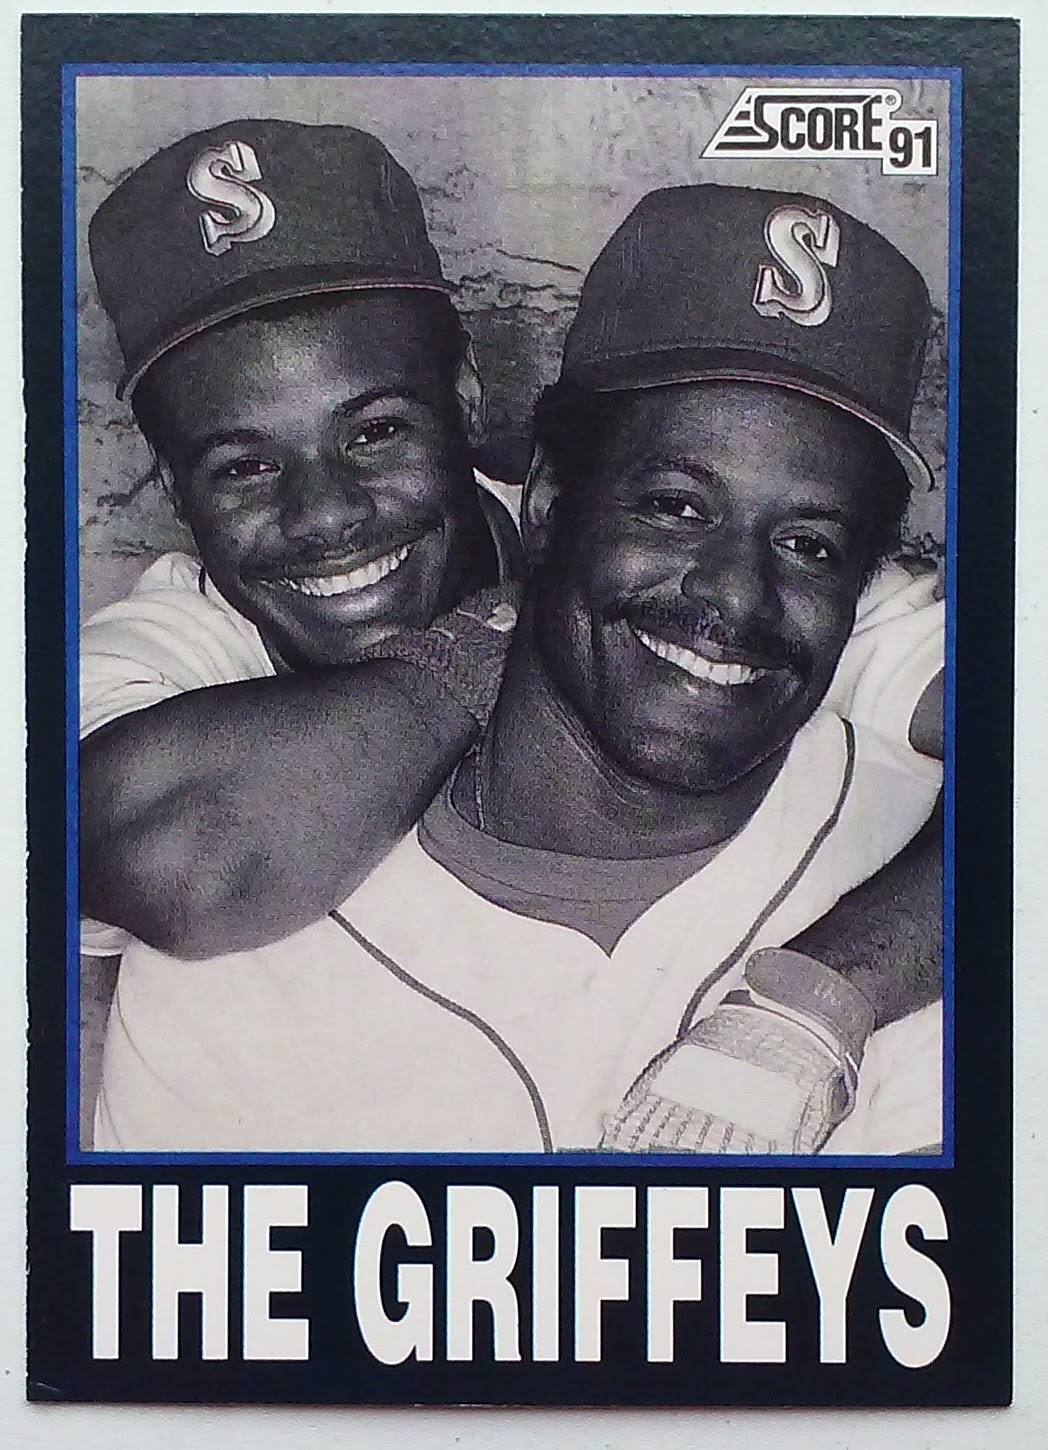 August 31, 1990: Ken Griffey Jr. and Sr. get back-to-back hits in